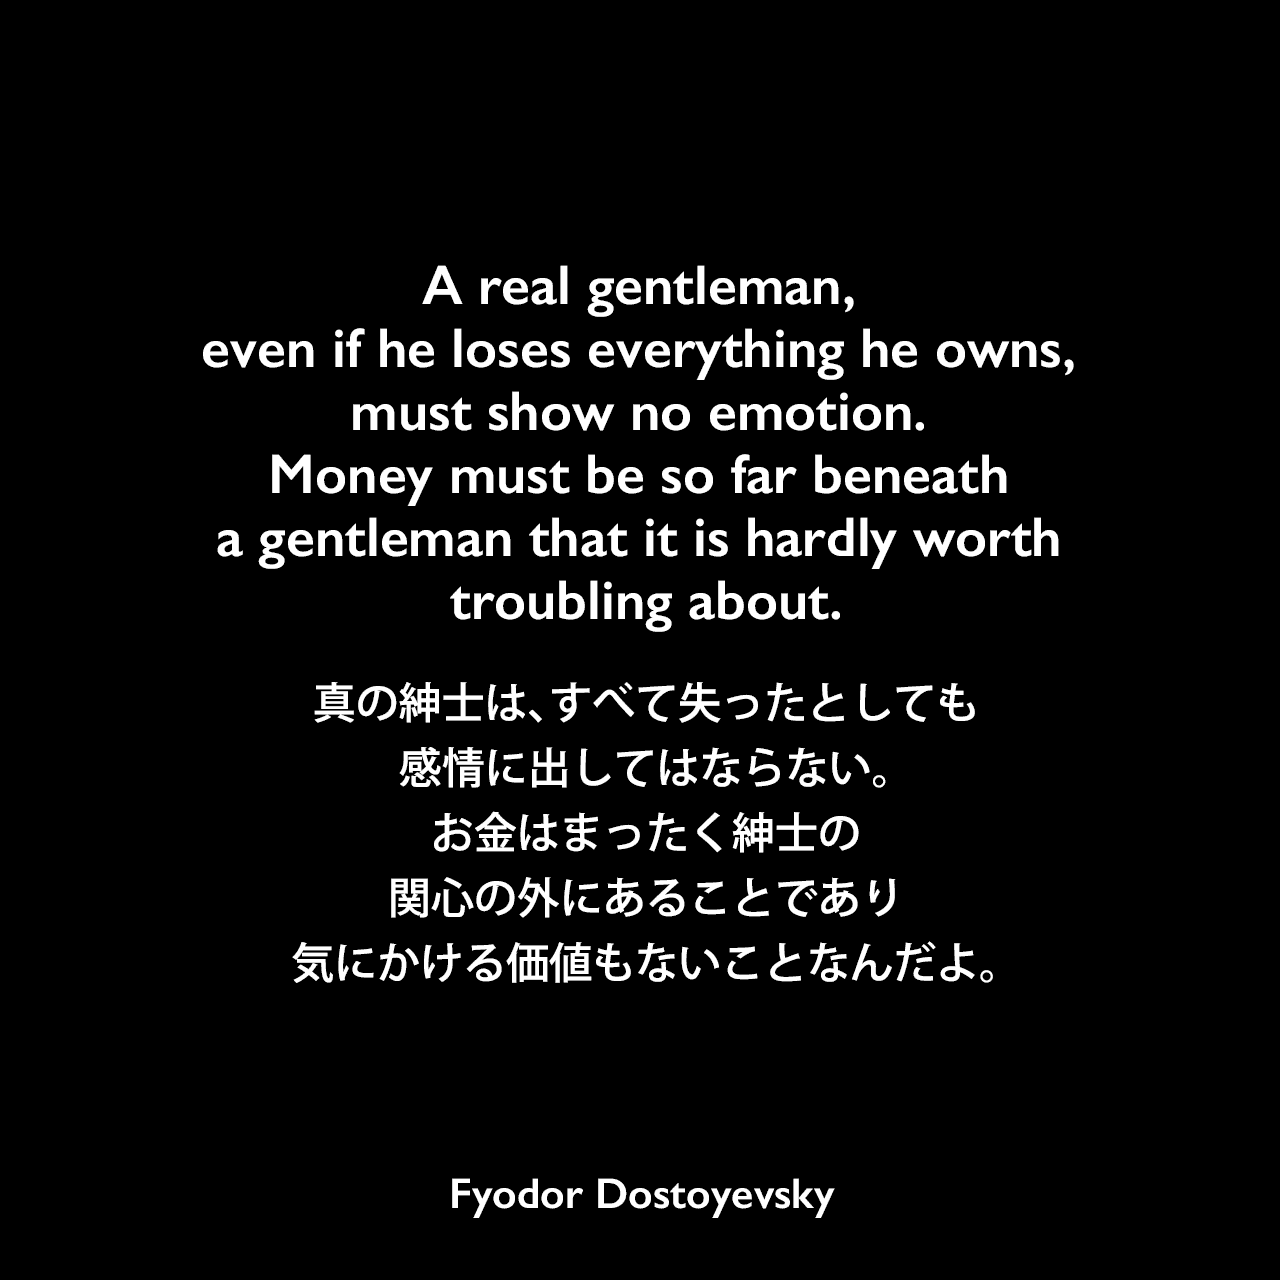 A real gentleman, even if he loses everything he owns, must show no emotion. Money must be so far beneath a gentleman that it is hardly worth troubling about.真の紳士は、すべて失ったとしても感情に出してはならない。お金はまったく紳士の関心の外にあることであり、気にかける価値もないことなんだよ。- ドストエフキーの小説「賭博者」よりFyodor Dostoyevsky